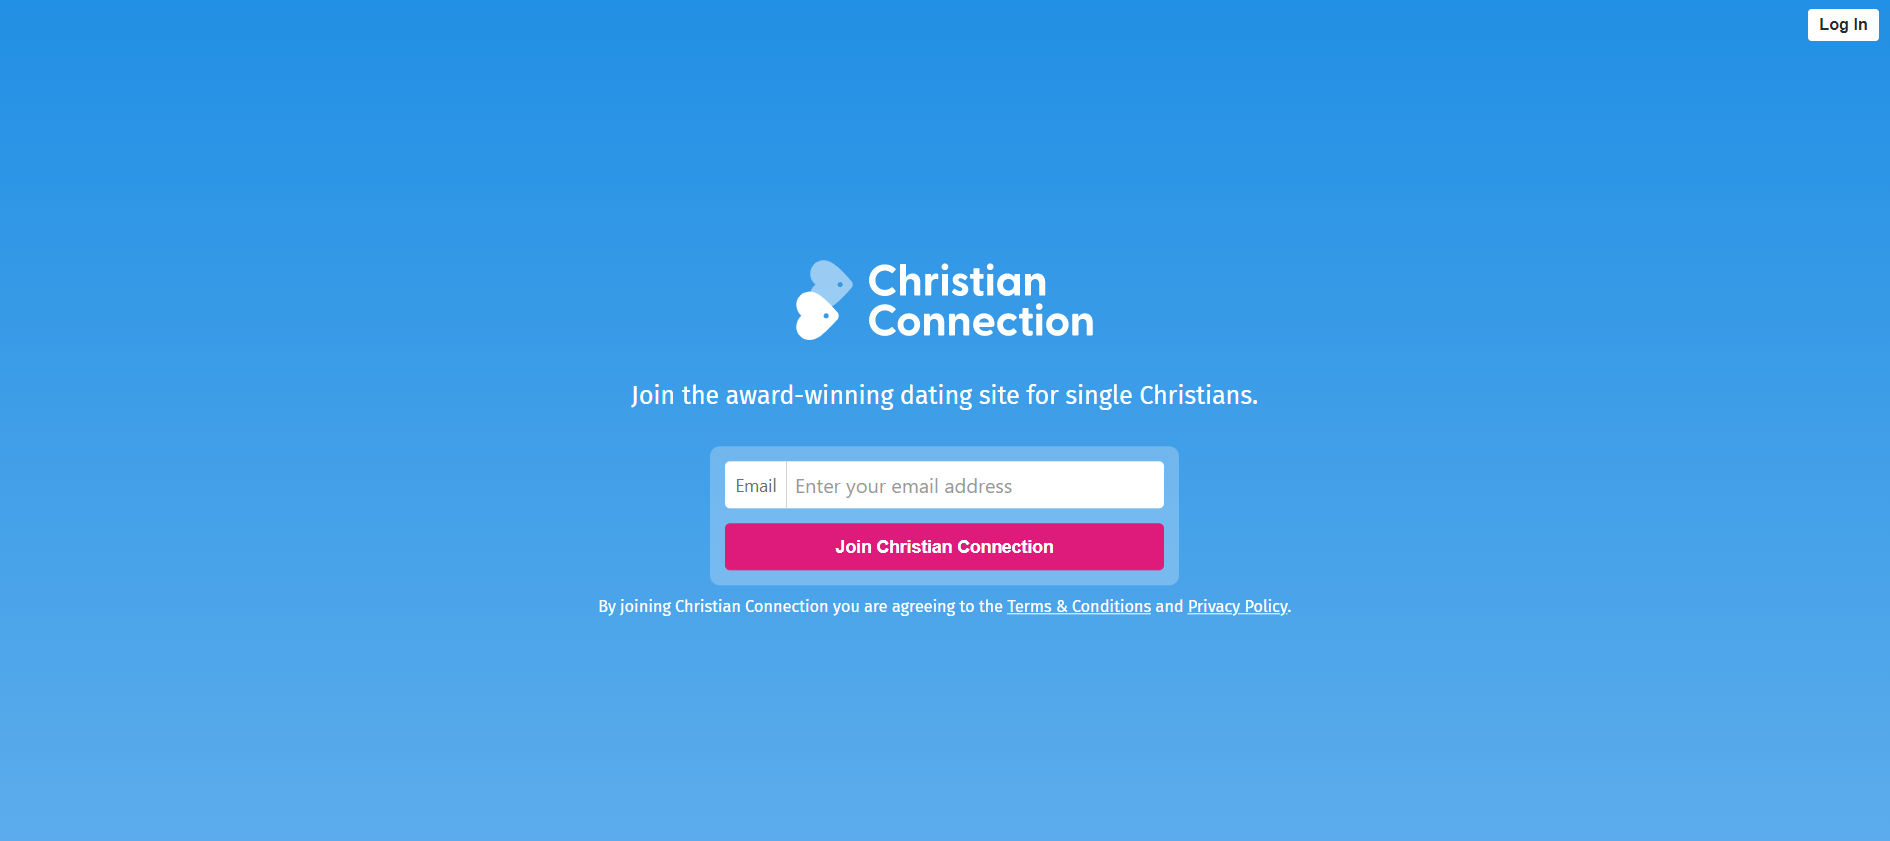 Christian Connection Dating Site